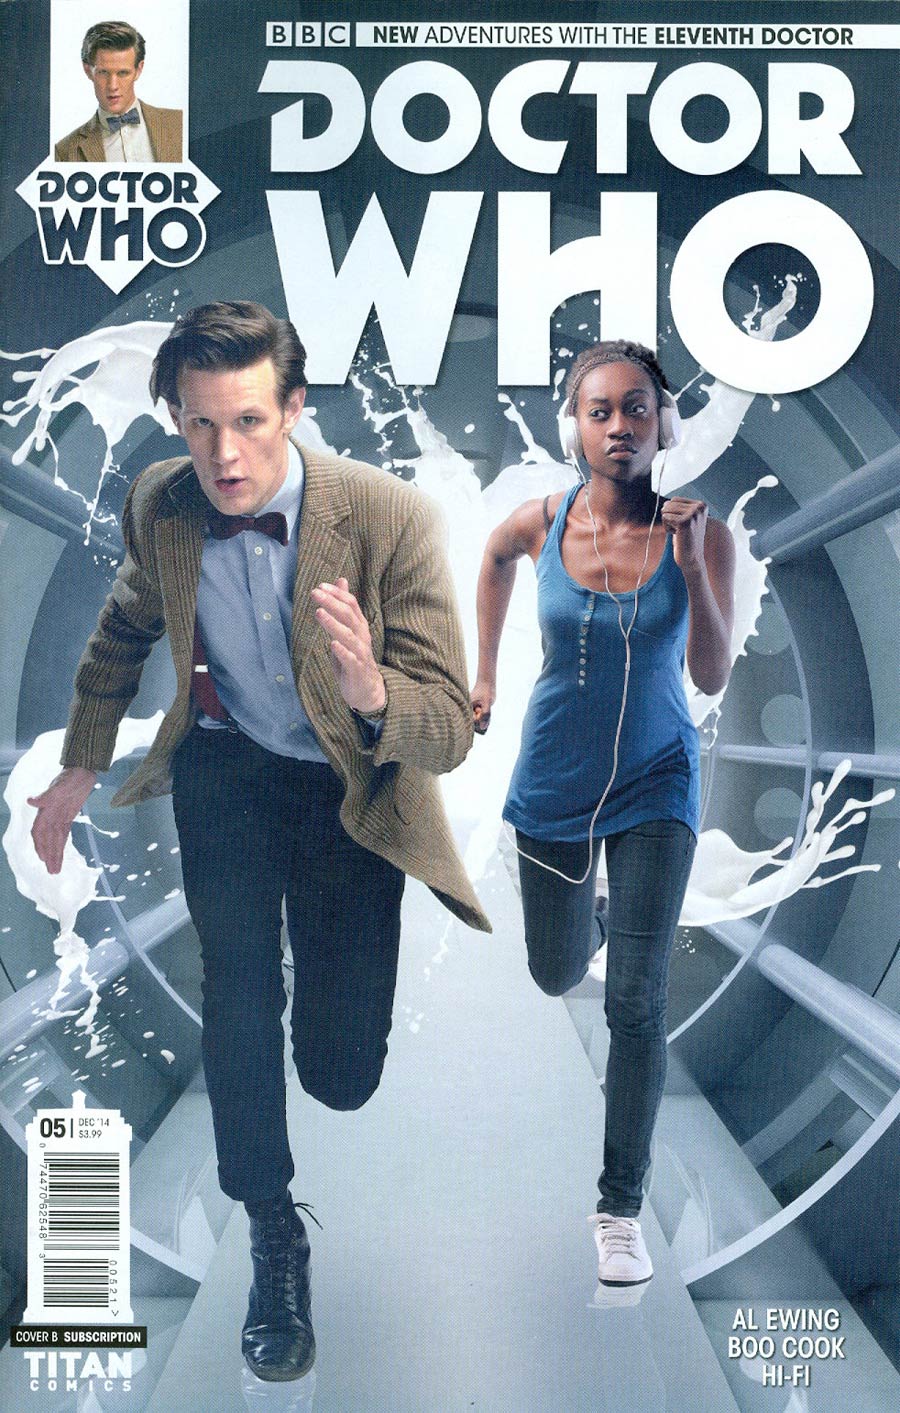 Doctor Who 11th Doctor #5 Cover B Variant Photo Subscription Cover